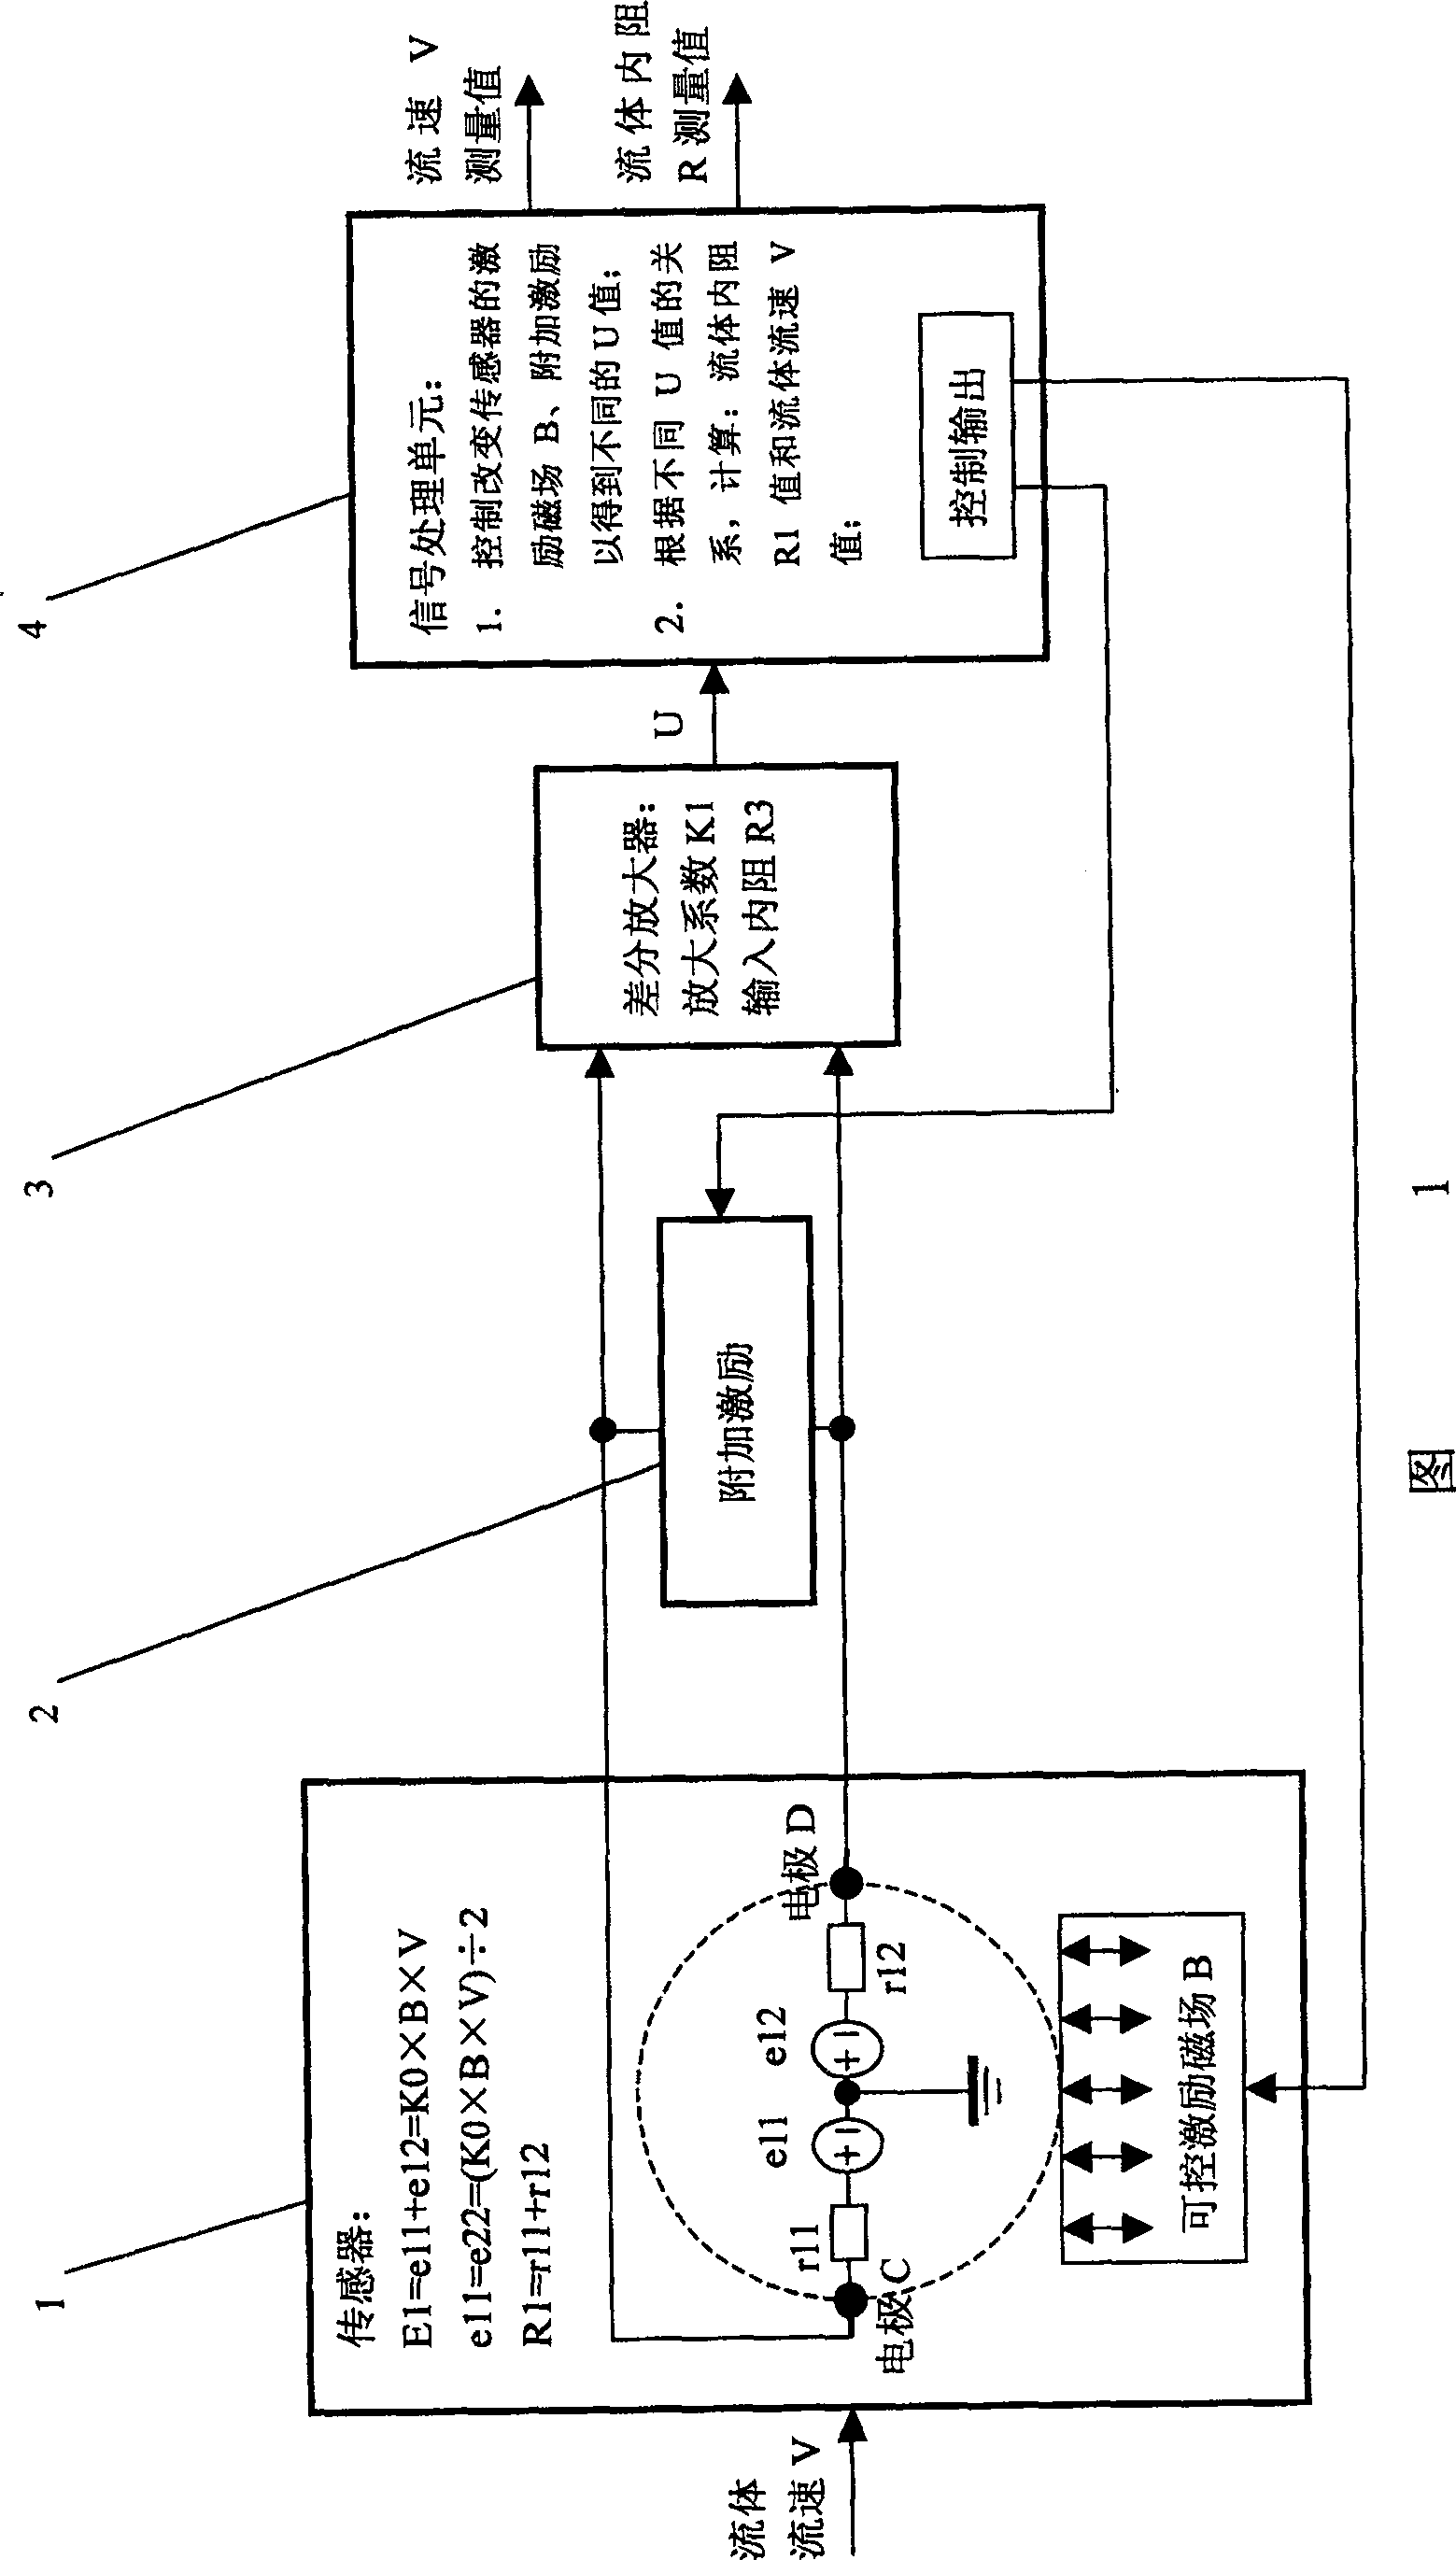 Parallel type electromagnetic flowmeter with dual excitations